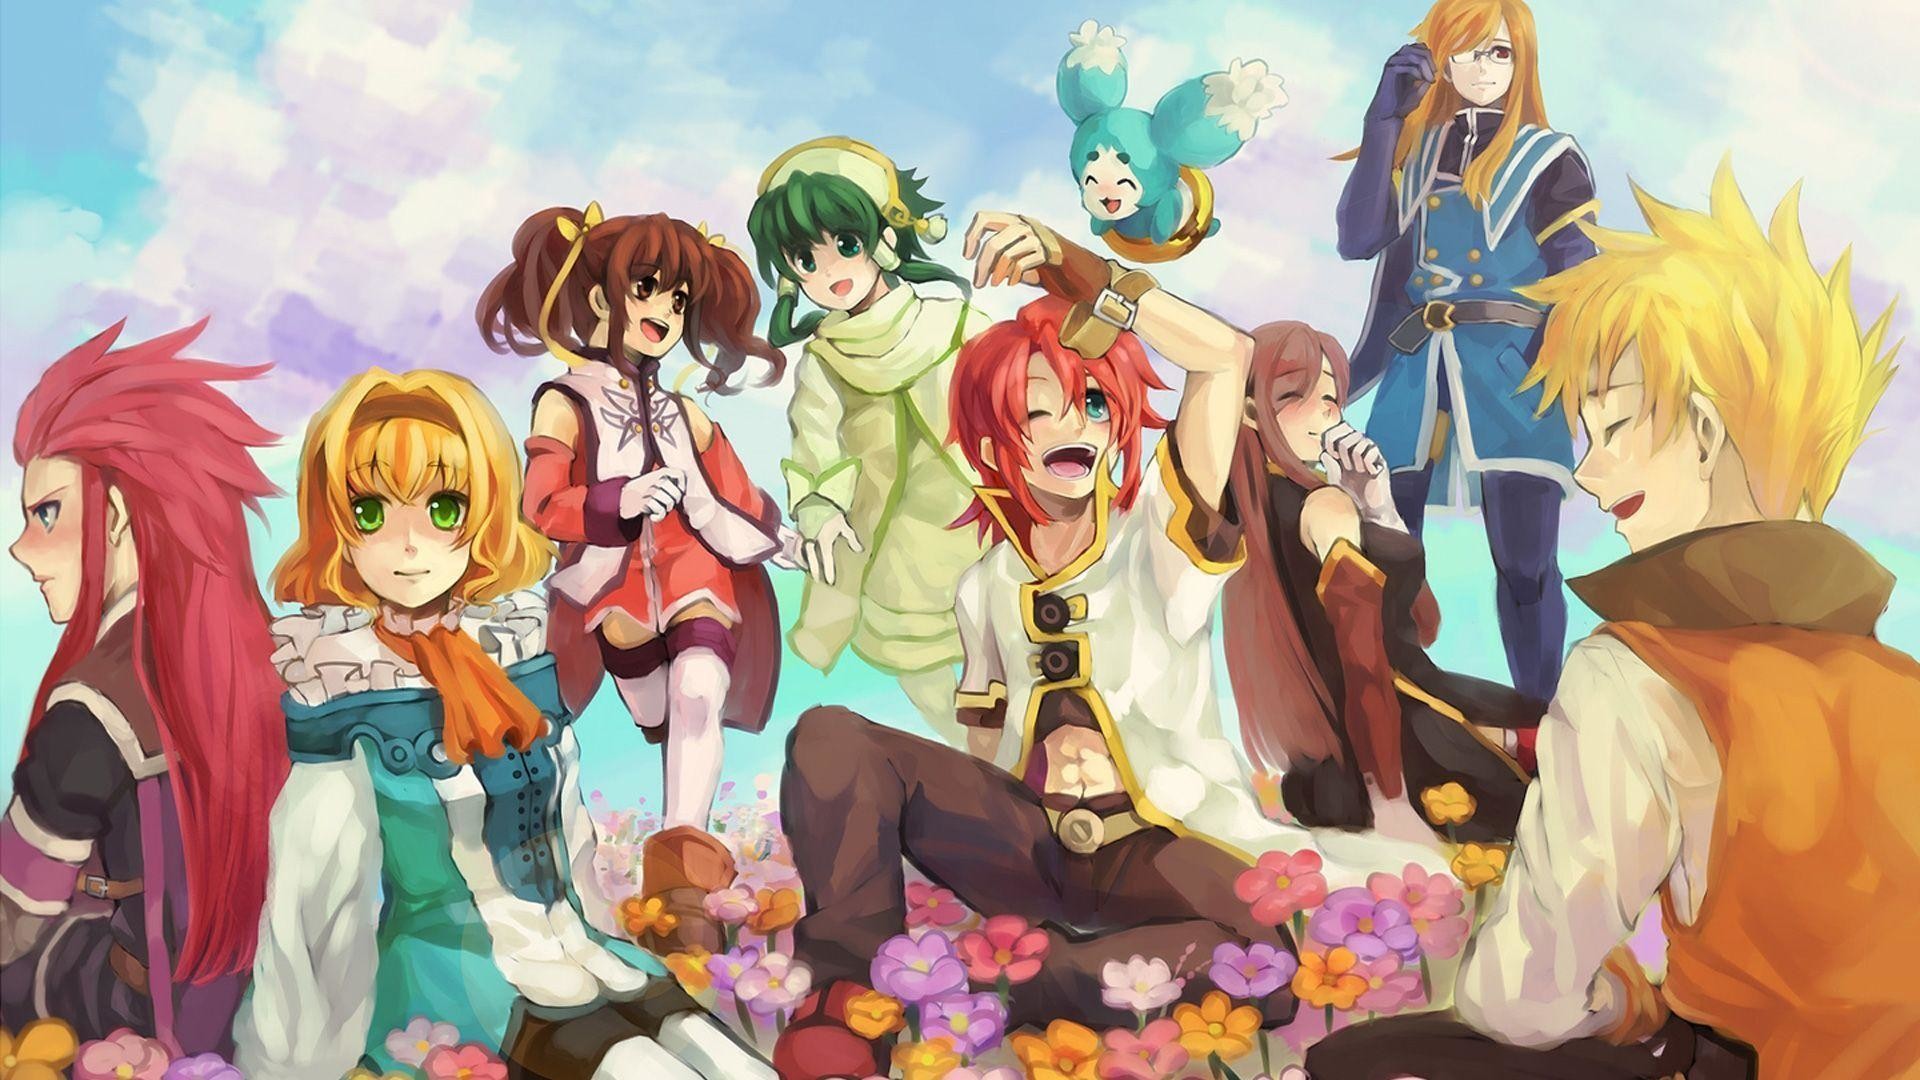 1920x1080 Free Tales of the Abyss Wallpaper in 